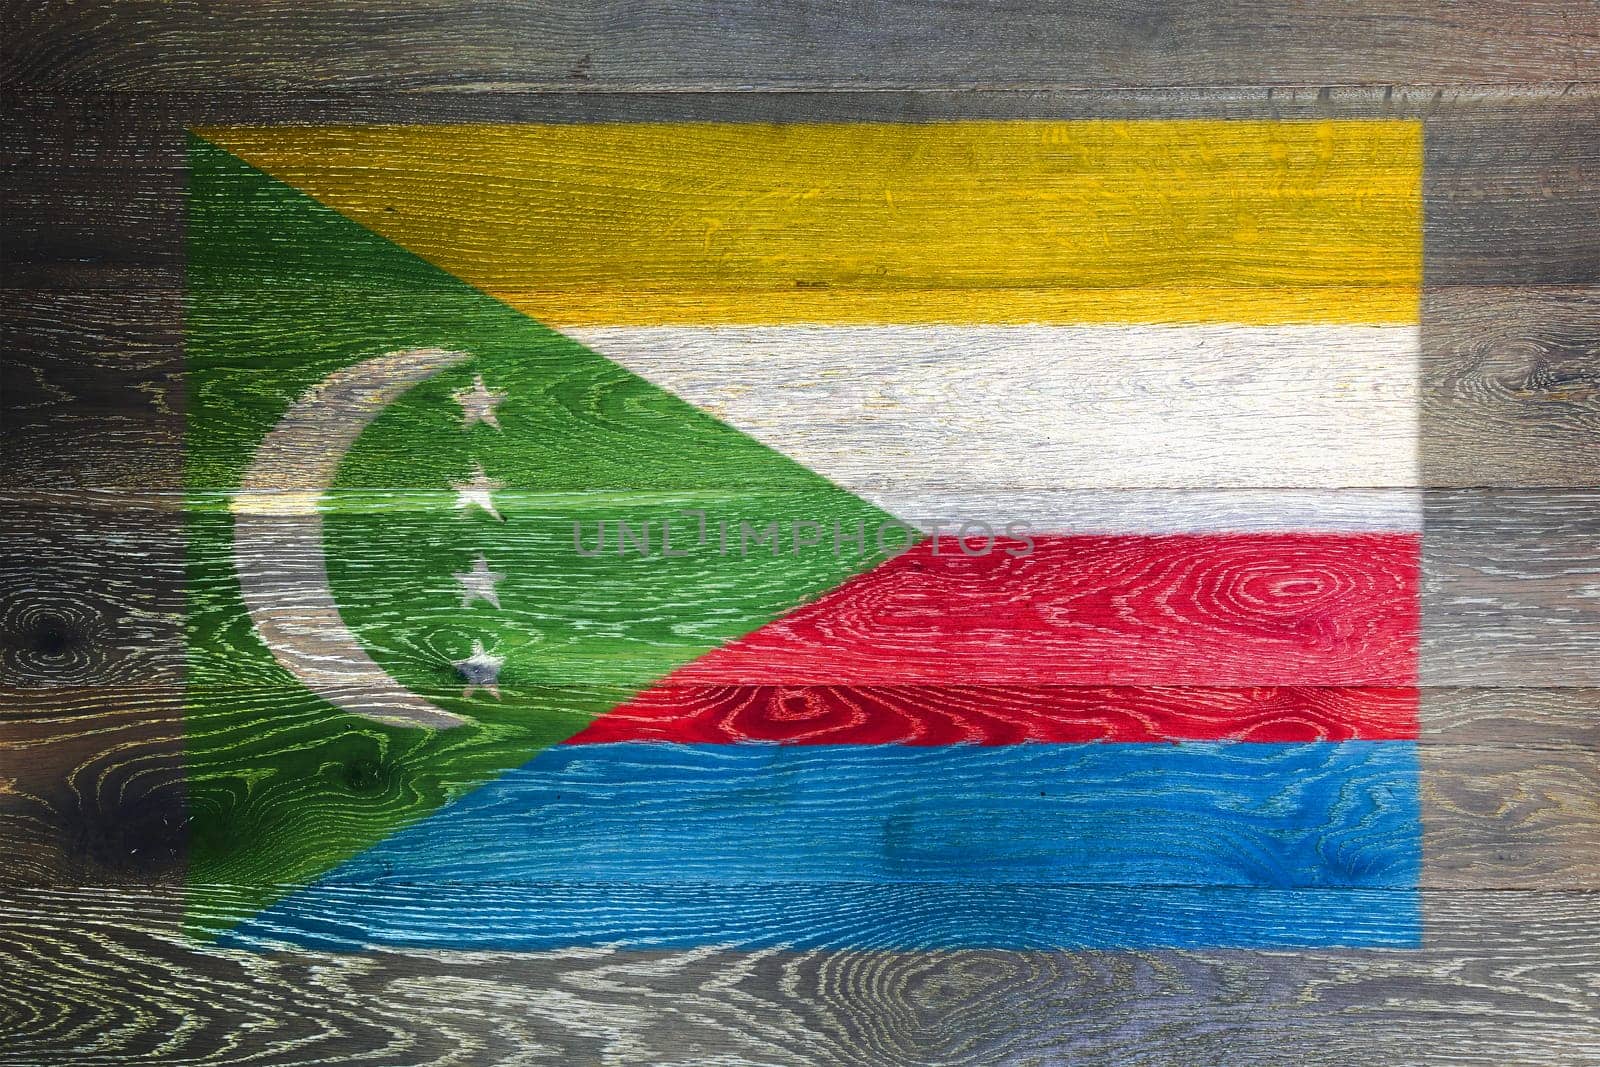 Comoros flag on rustic old wood surface background by VivacityImages